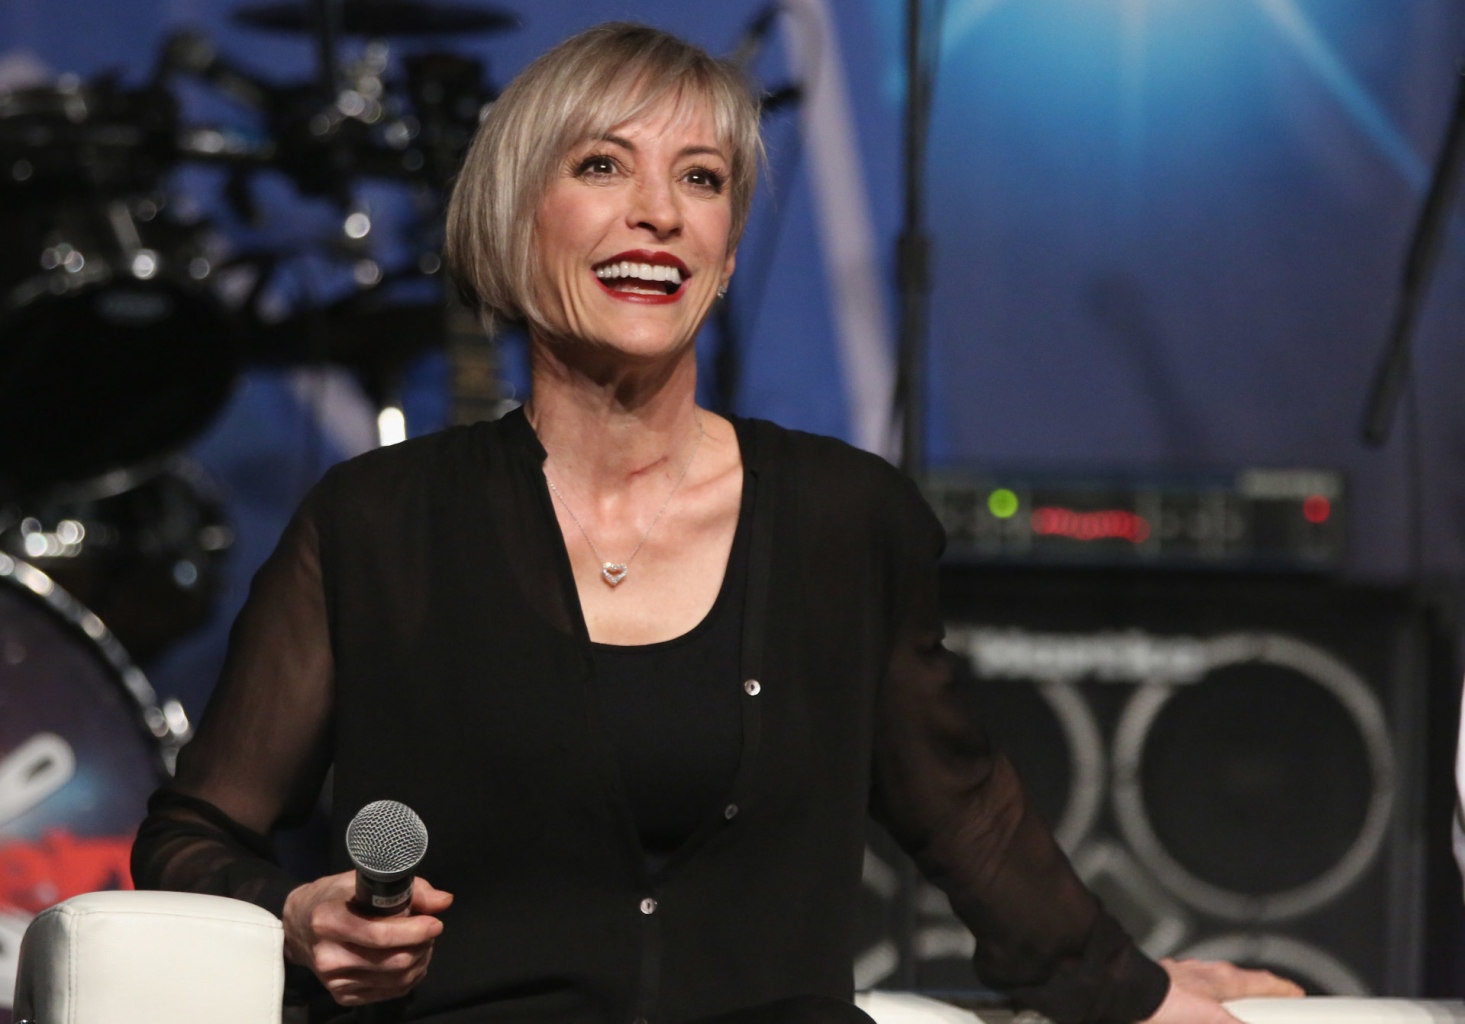 Nana Visitor and Terry Farrell Annual Official Star Trek Convention in Las Vegas